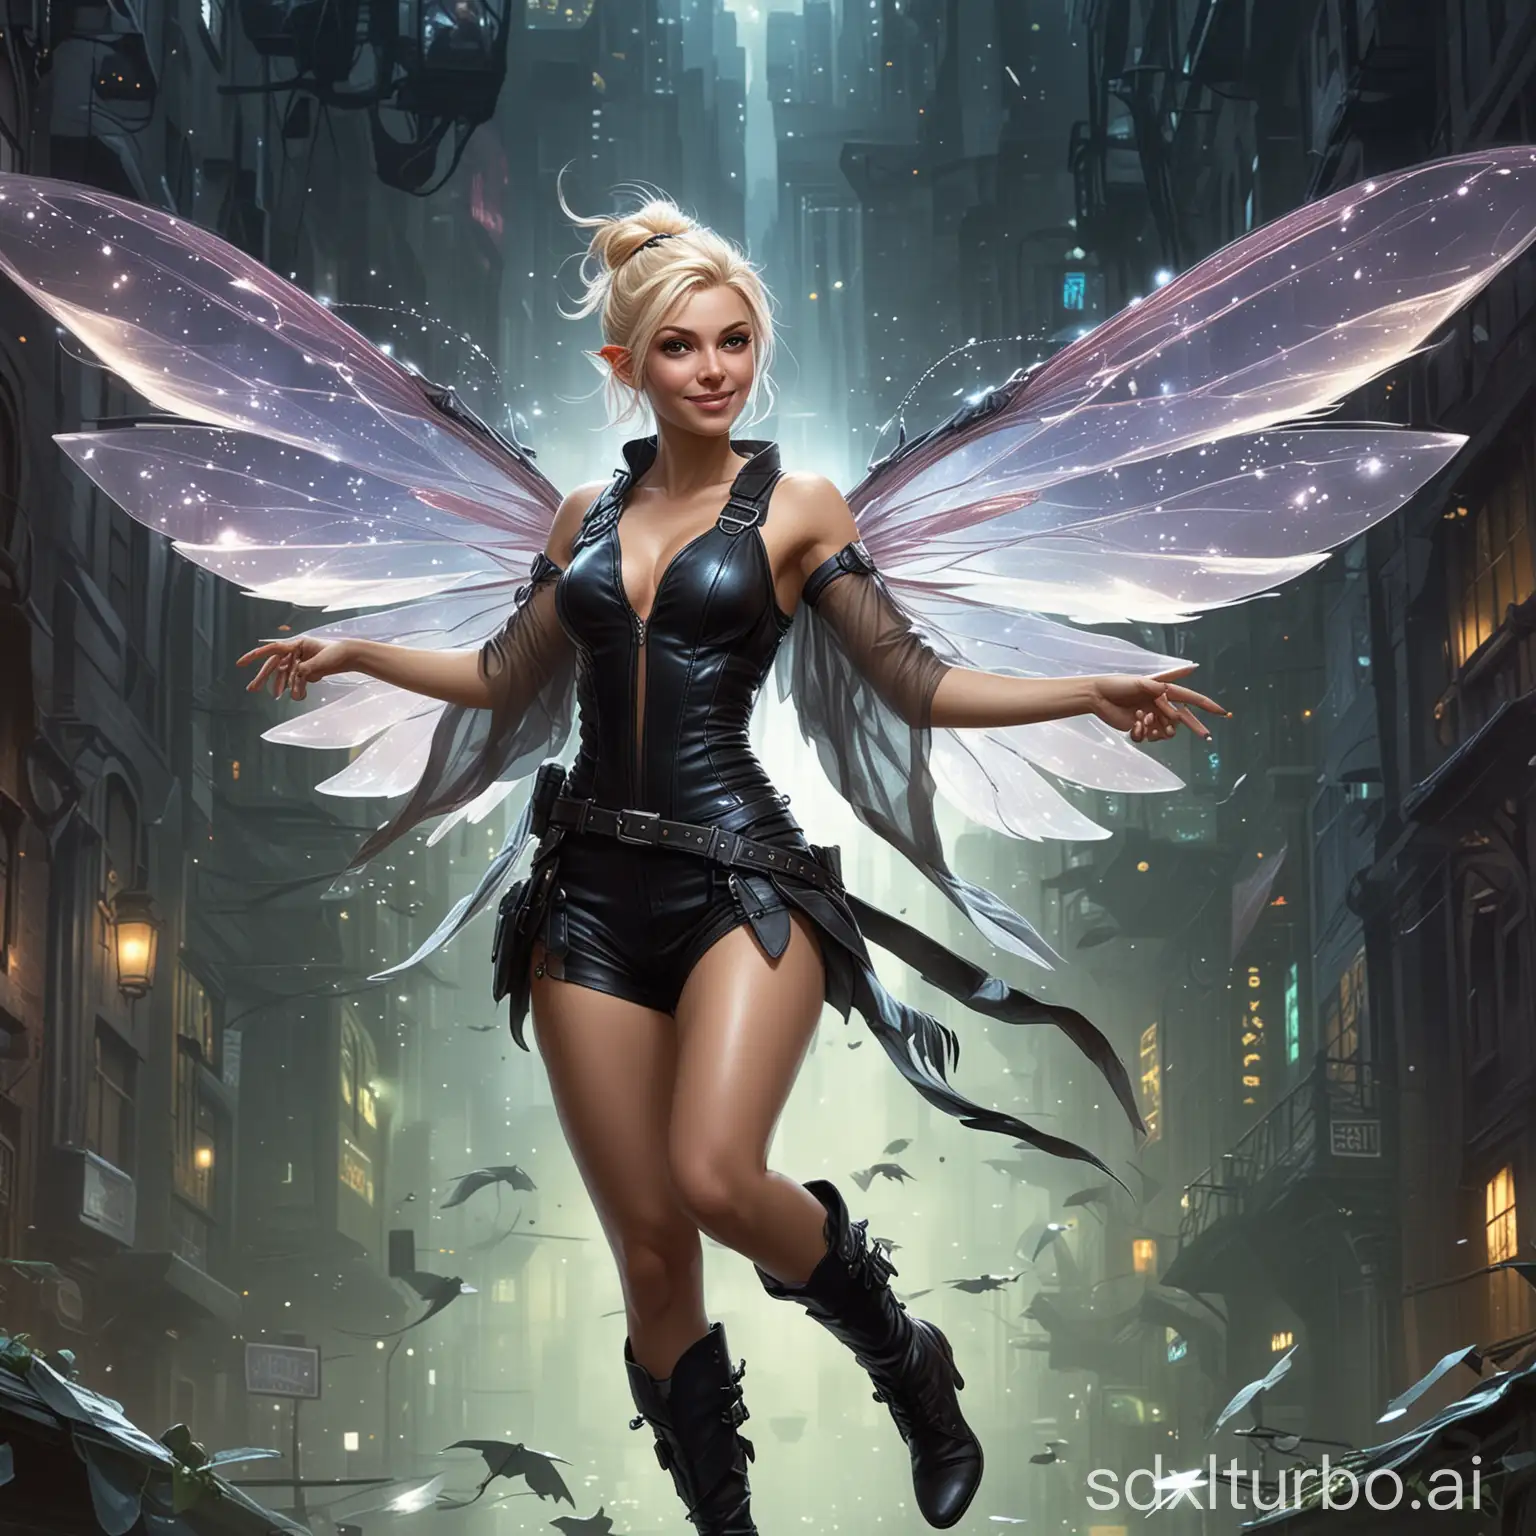 Create an image about "A Shadowrun legend". Show a bold, small, flying pixie. The pixie flies with big, sparkling, translucent fey-wings. She wears a jumpsuit, poses like on a blockbuster-poster and grins wide.